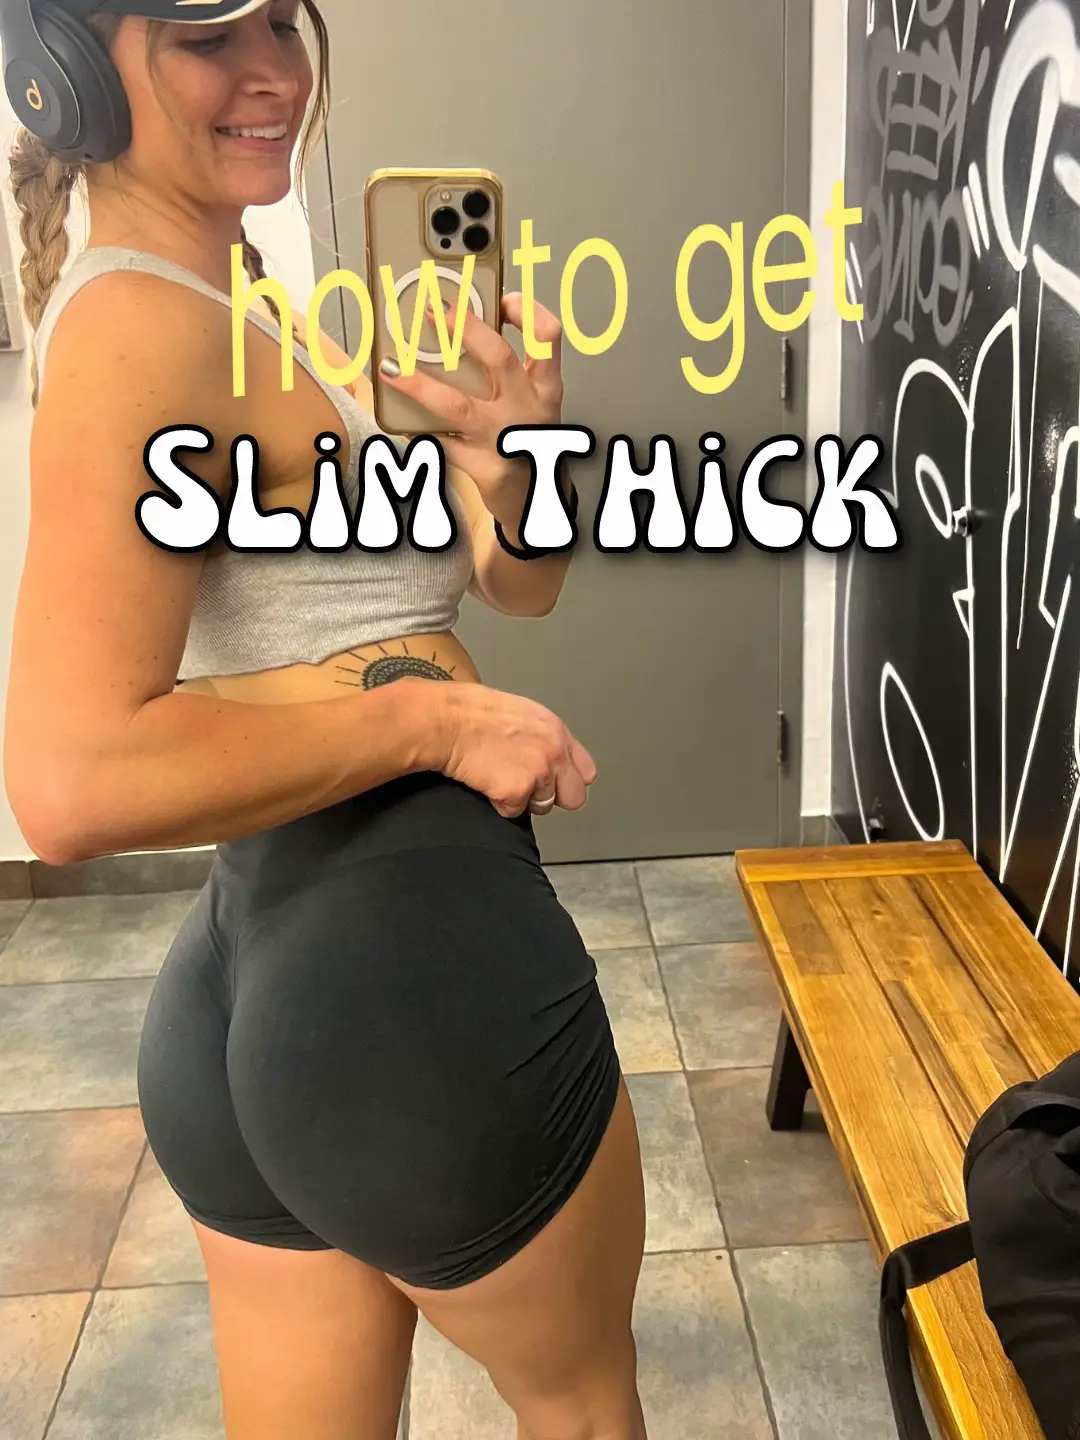 Slim thick workout❤️  Slim thick workout, Health and fitness